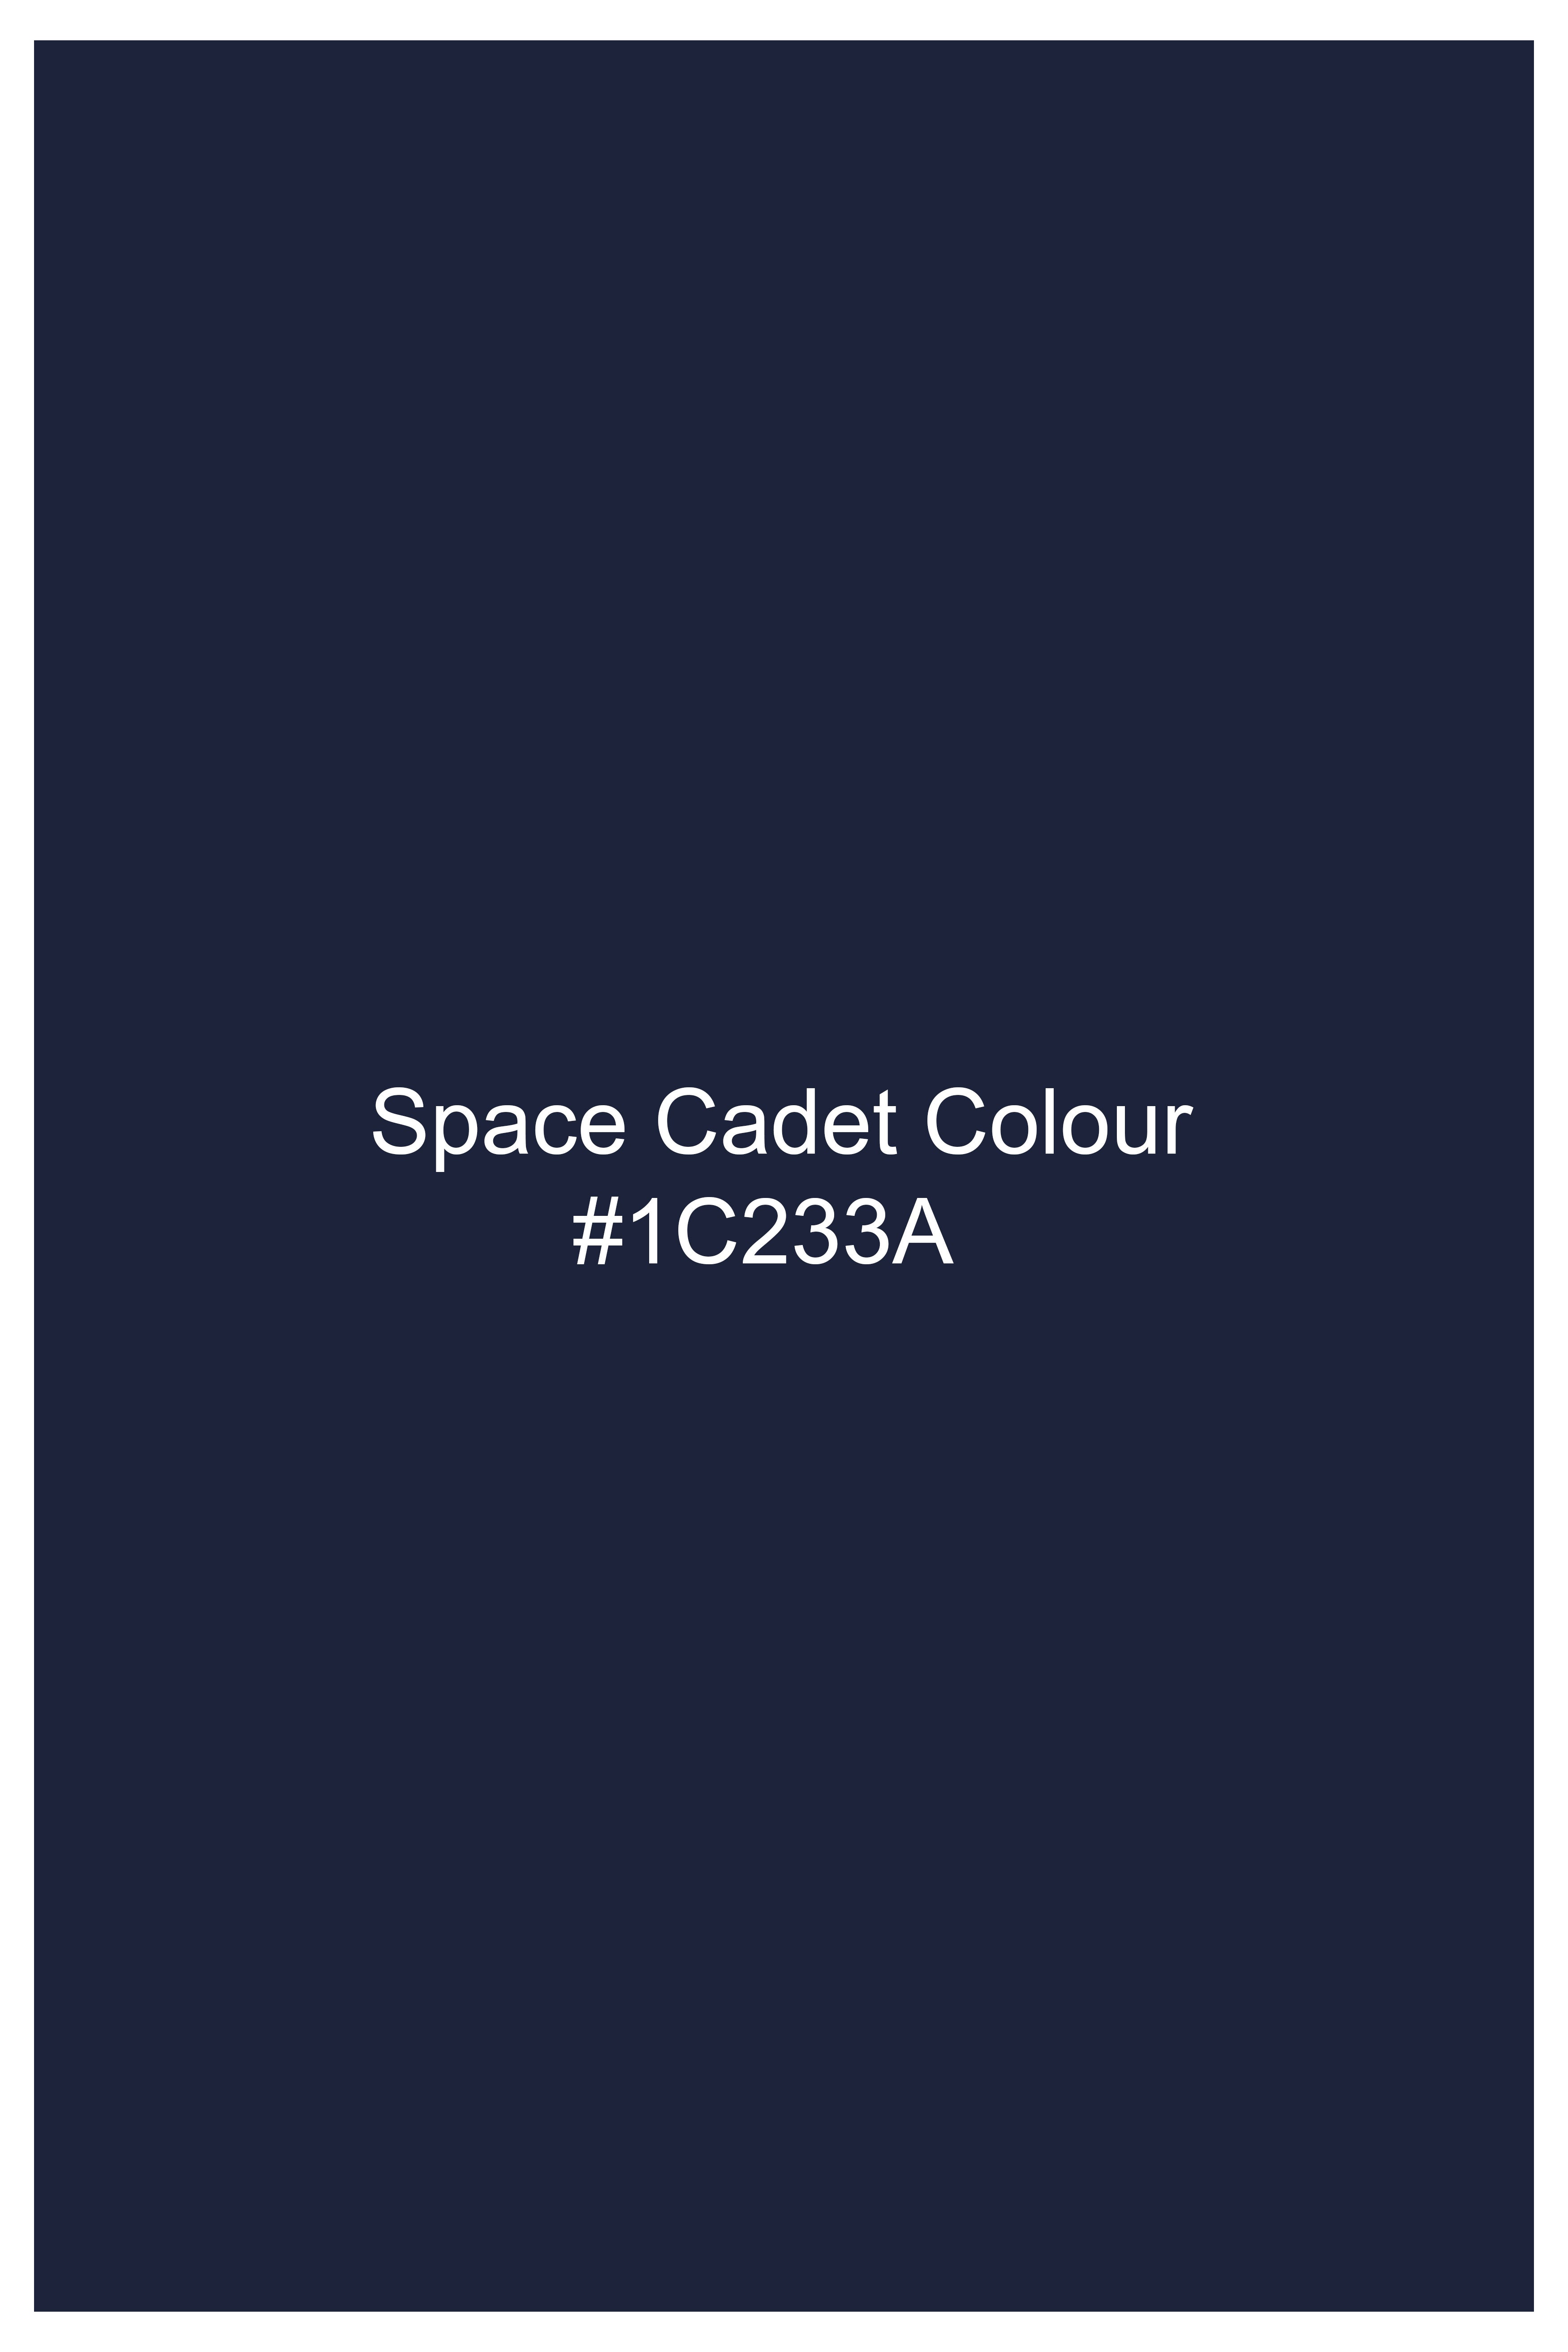 Space Cadet Blue Wool Rich Stretchable Pant T2939-SW-28, T2939-SW-30, T2939-SW-32, T2939-SW-34, T2939-SW-36, T2939-SW-38, T2939-SW-40, T2939-SW-42, T2939-SW-44